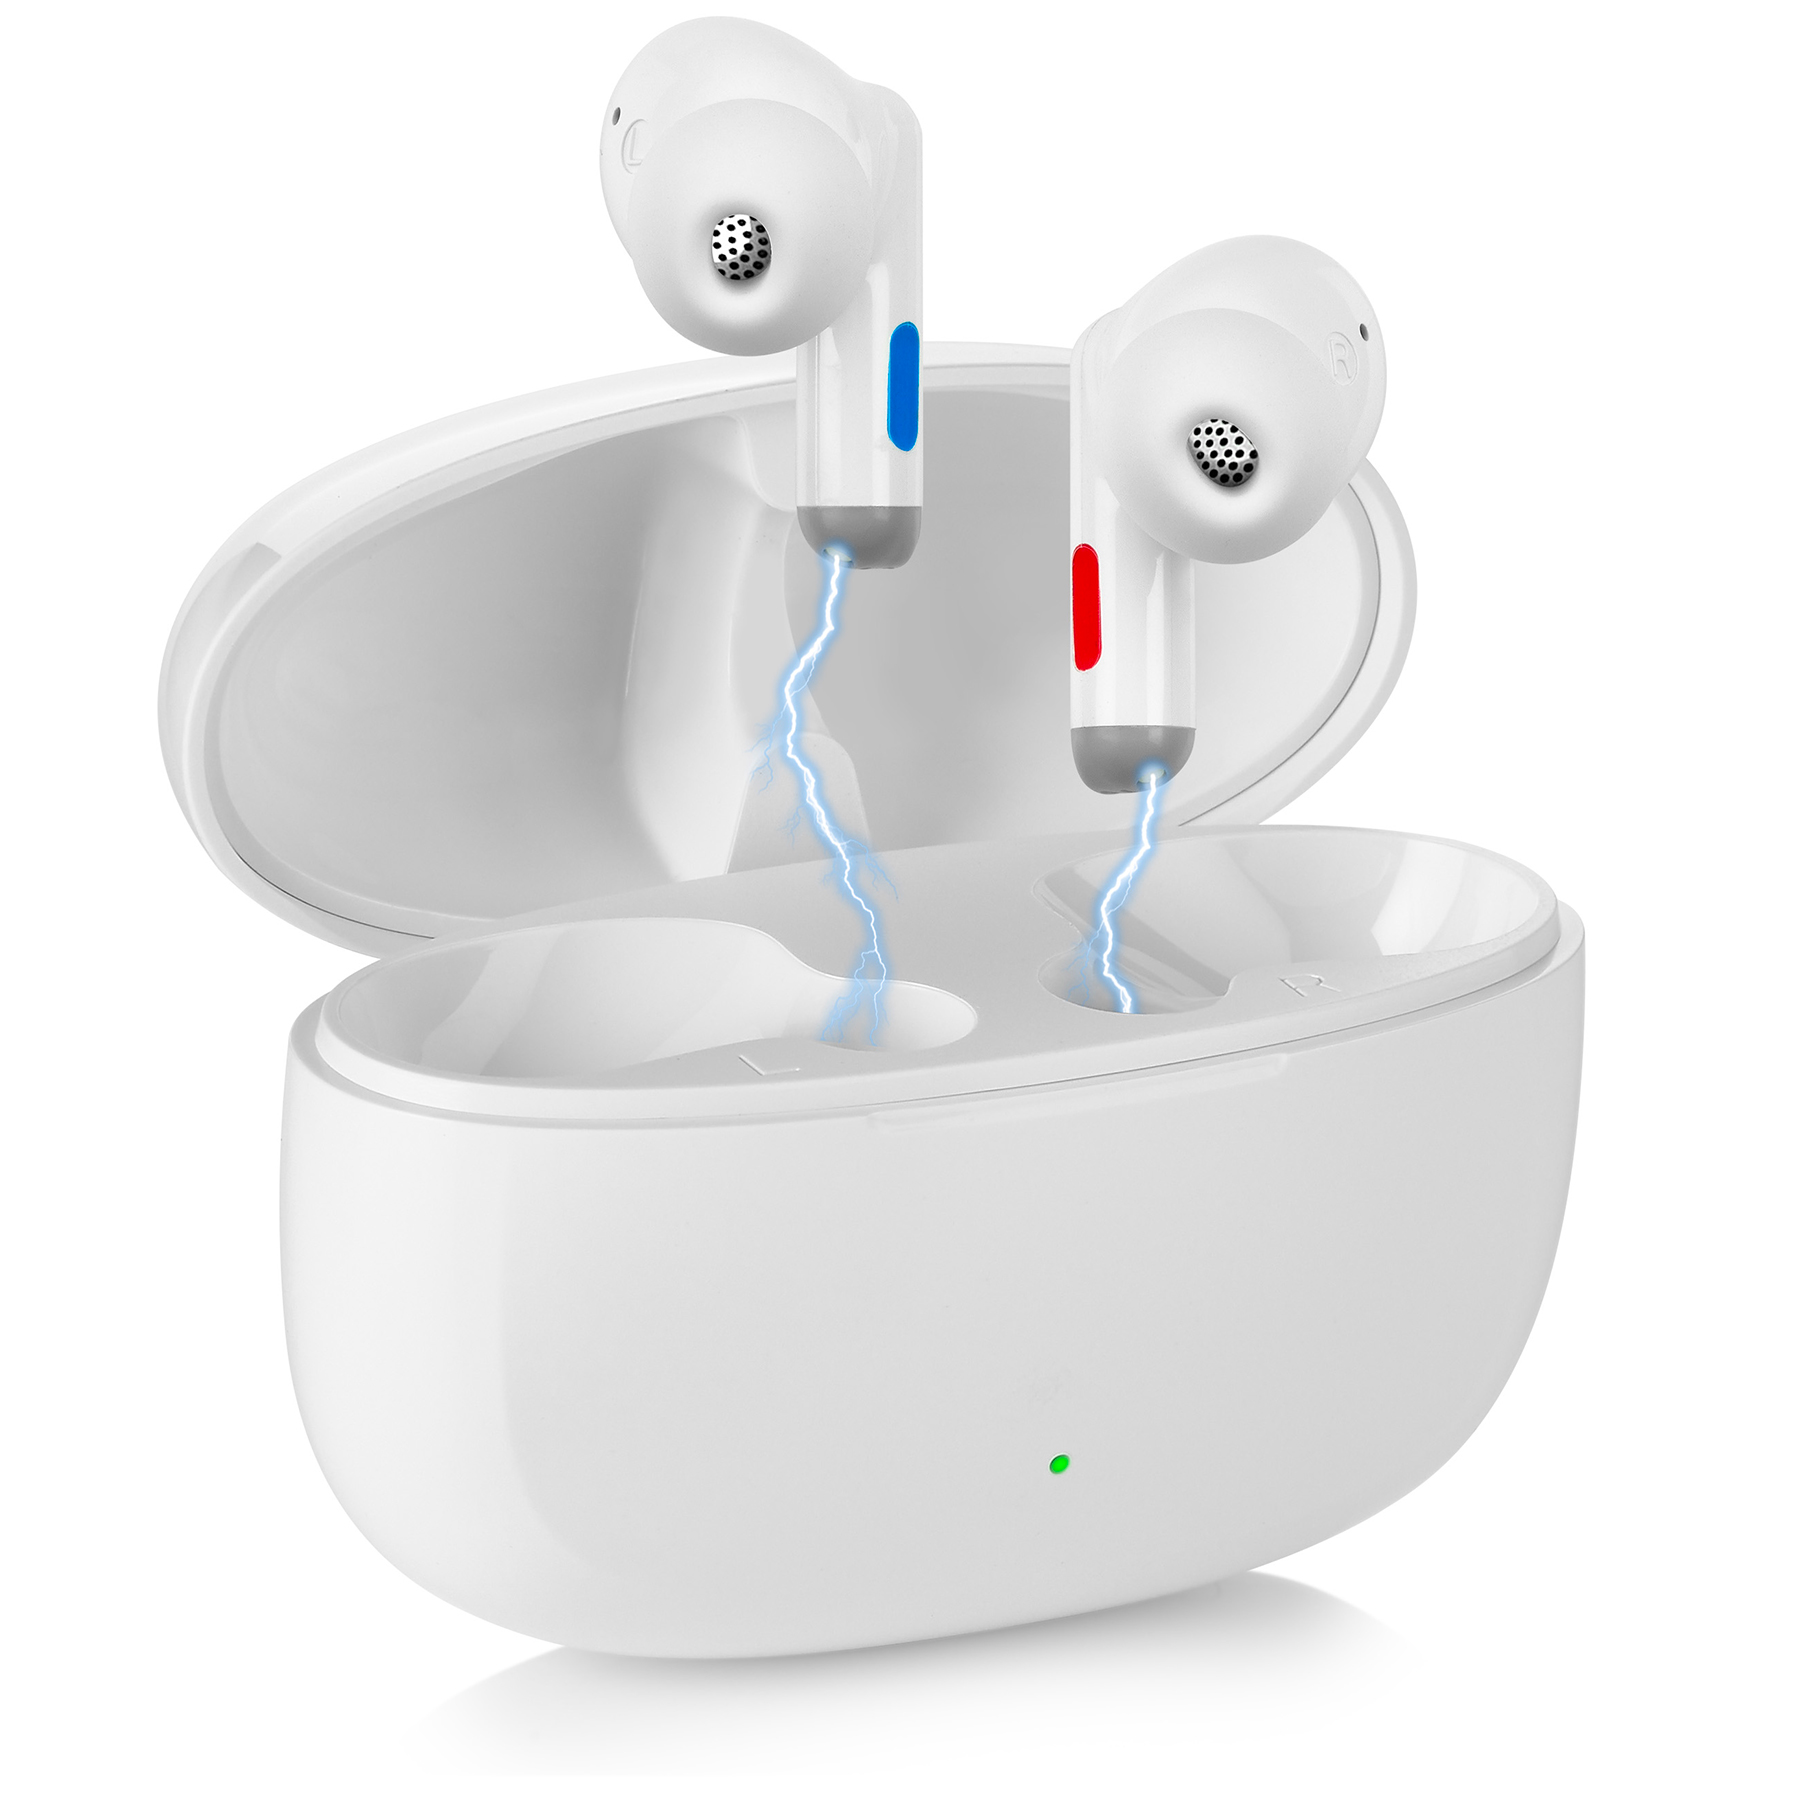 Hearing aid Amplifier Earbuds | Wireless Bluetooth & Noise Canceling